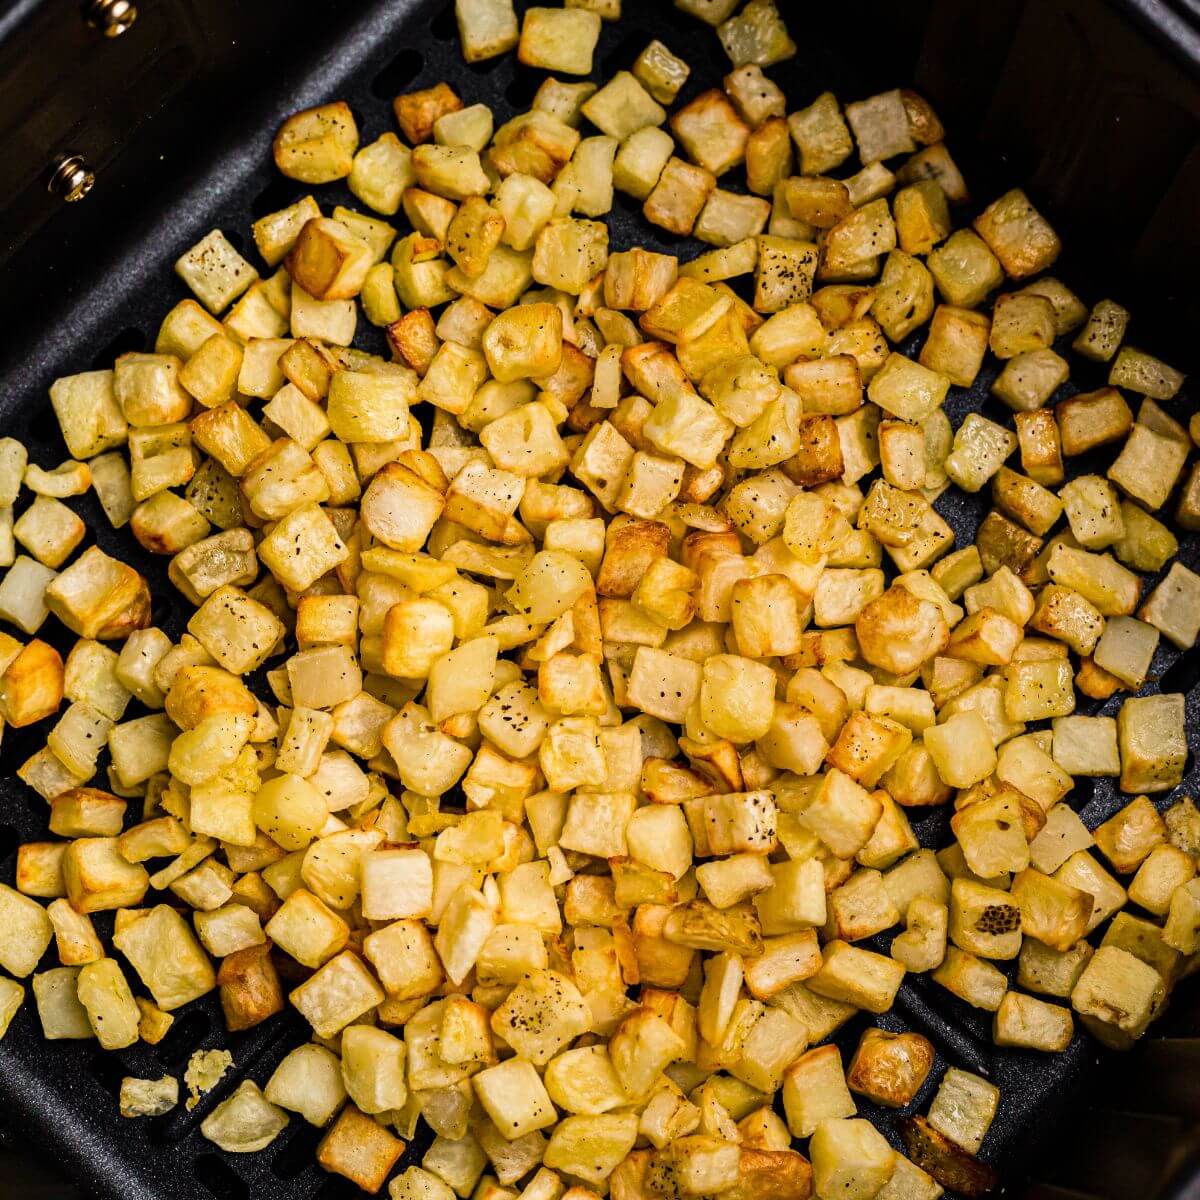 Golden and crispy cooked diced potatoes after being cooked and seasoned in the air fryer.